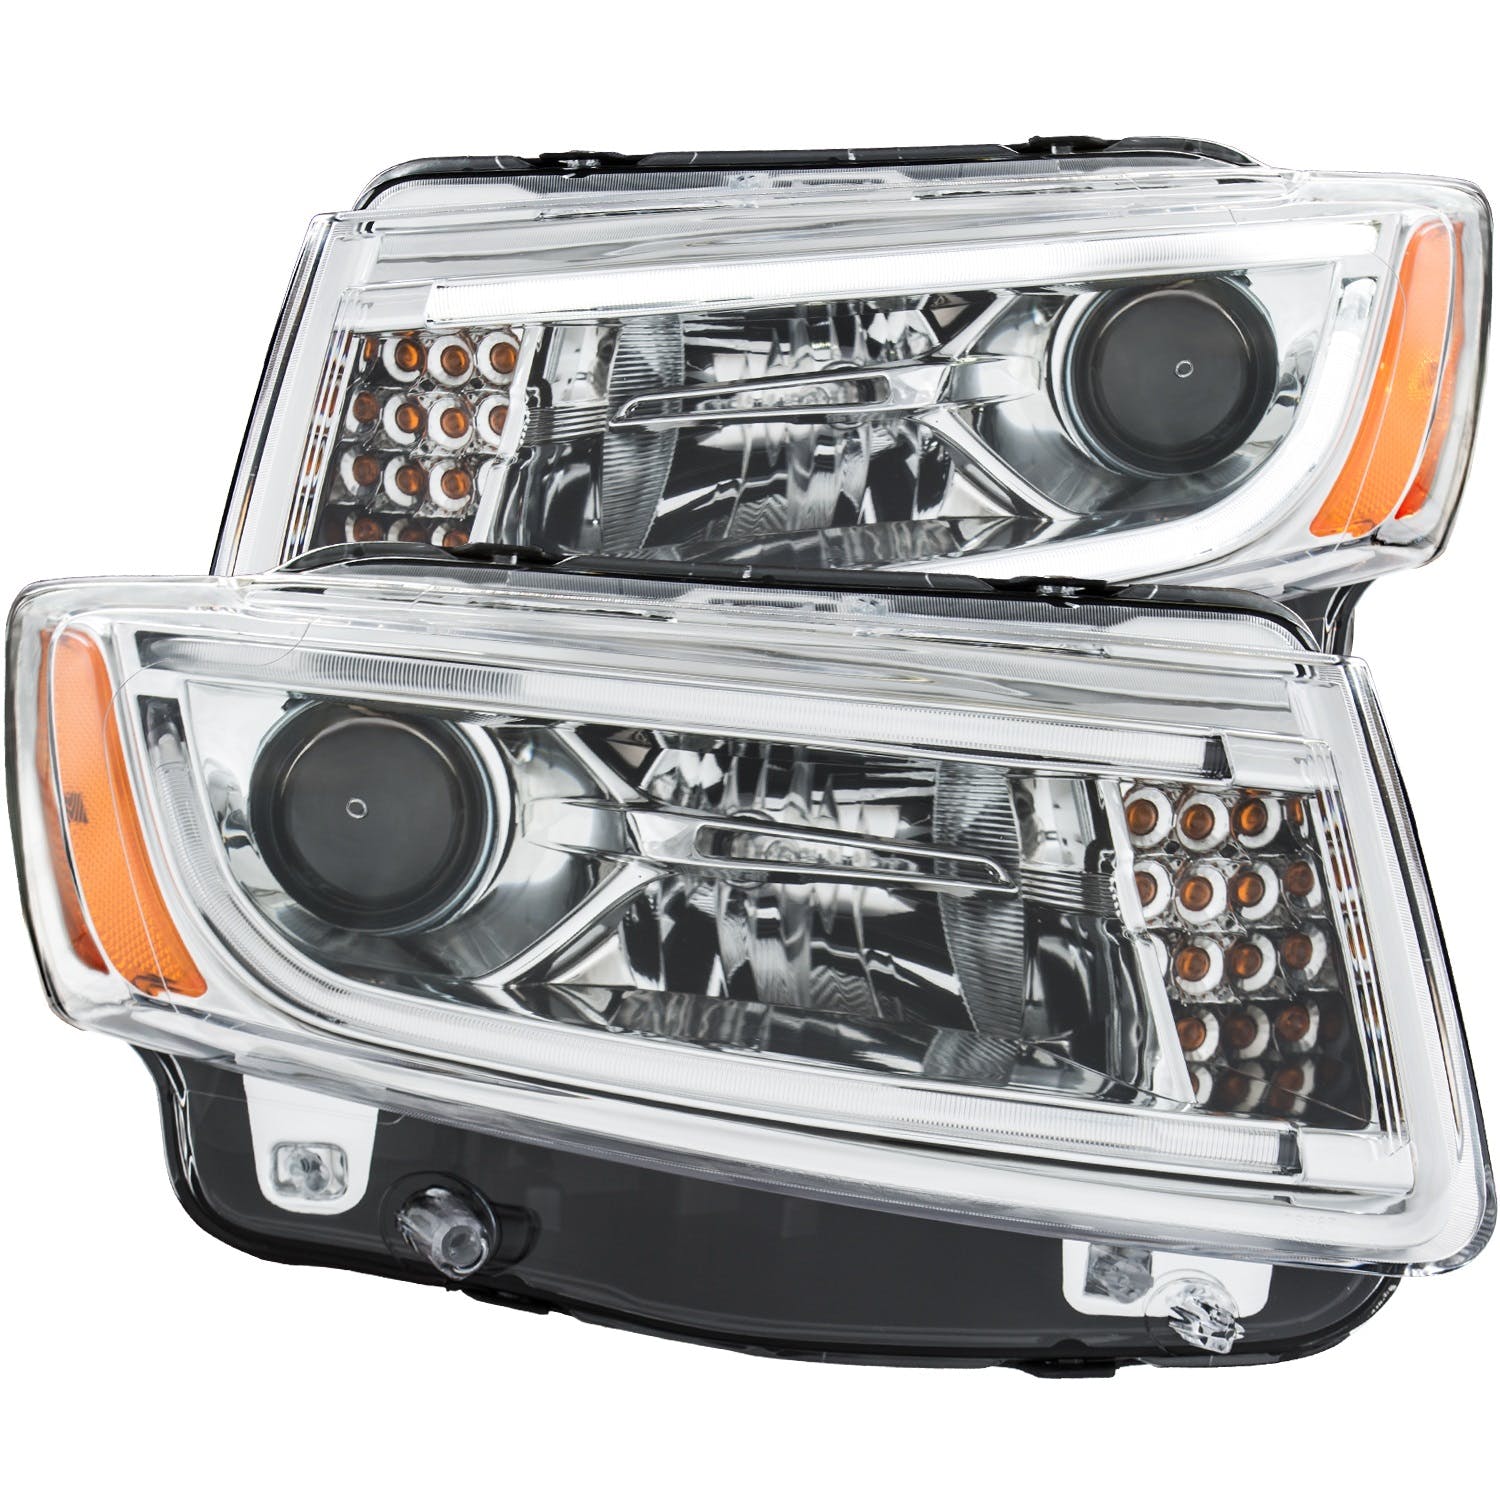 AnzoUSA 111328 Projector Headlights with Plank Style Design Chrome